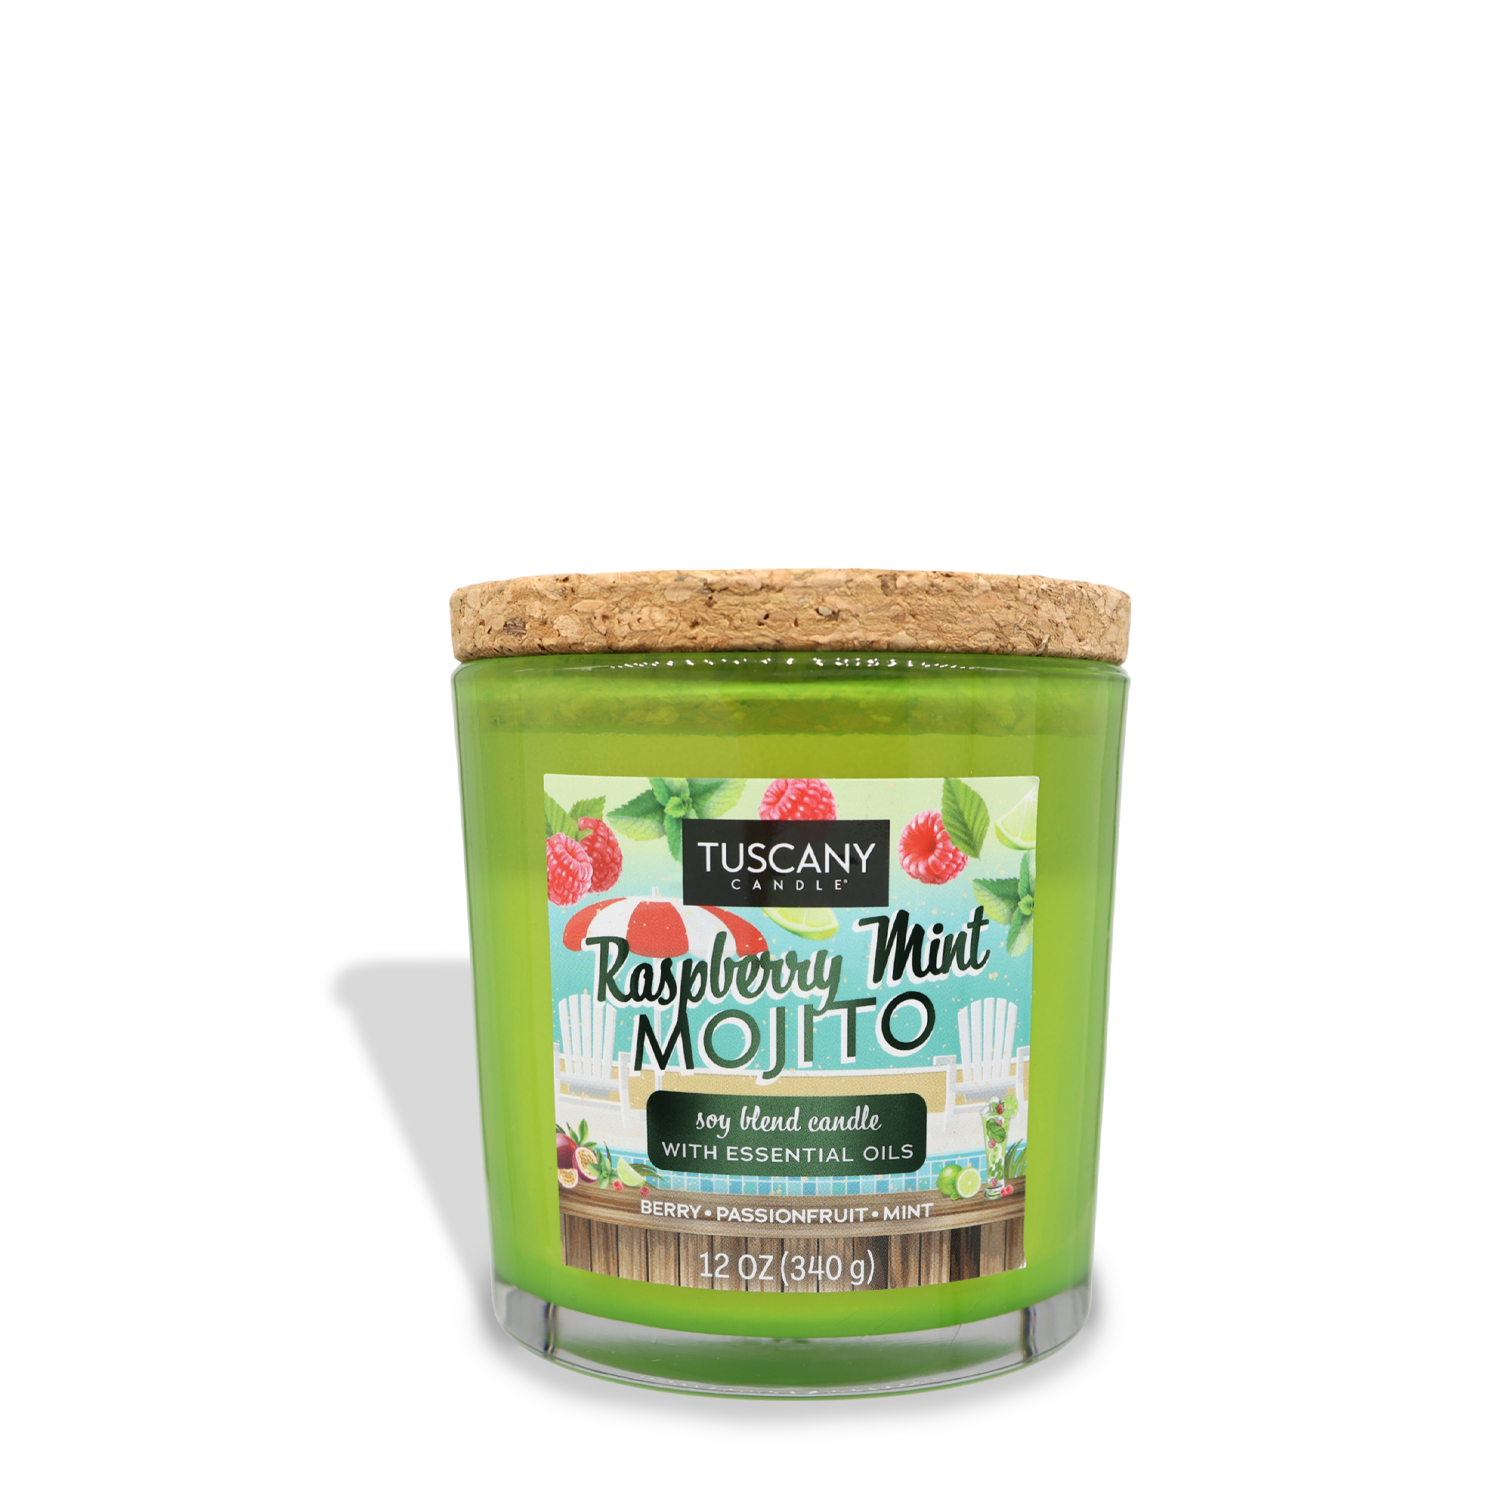 A green Tuscany Candle® SEASONAL labeled "Raspberry Mint Mojito (12 oz) – Sunset Beach Bar Collection," infused with essential oils and the scent of freshly crushed mint. The candle, topped with a cork lid, weighs 12 oz (340 g).